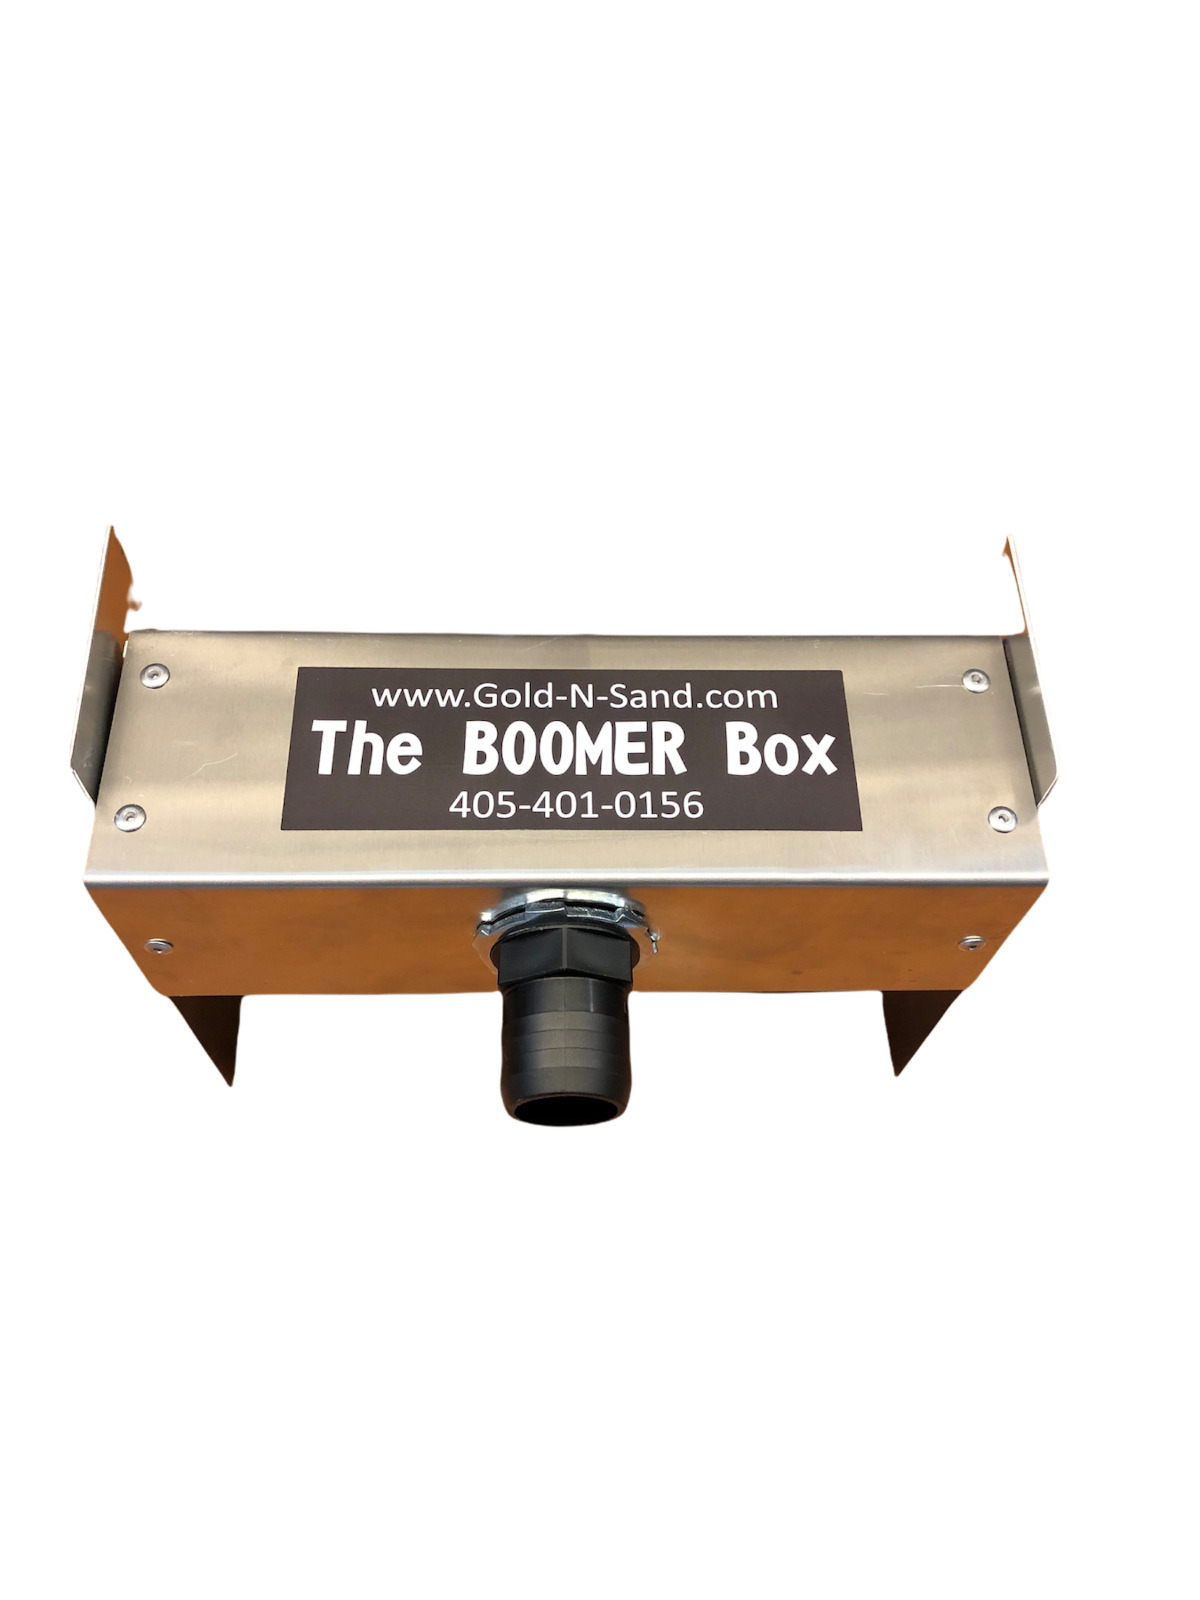 The BOOMER Box converts Gold-N-Sand X-Stream Pro to Power Sluice. 